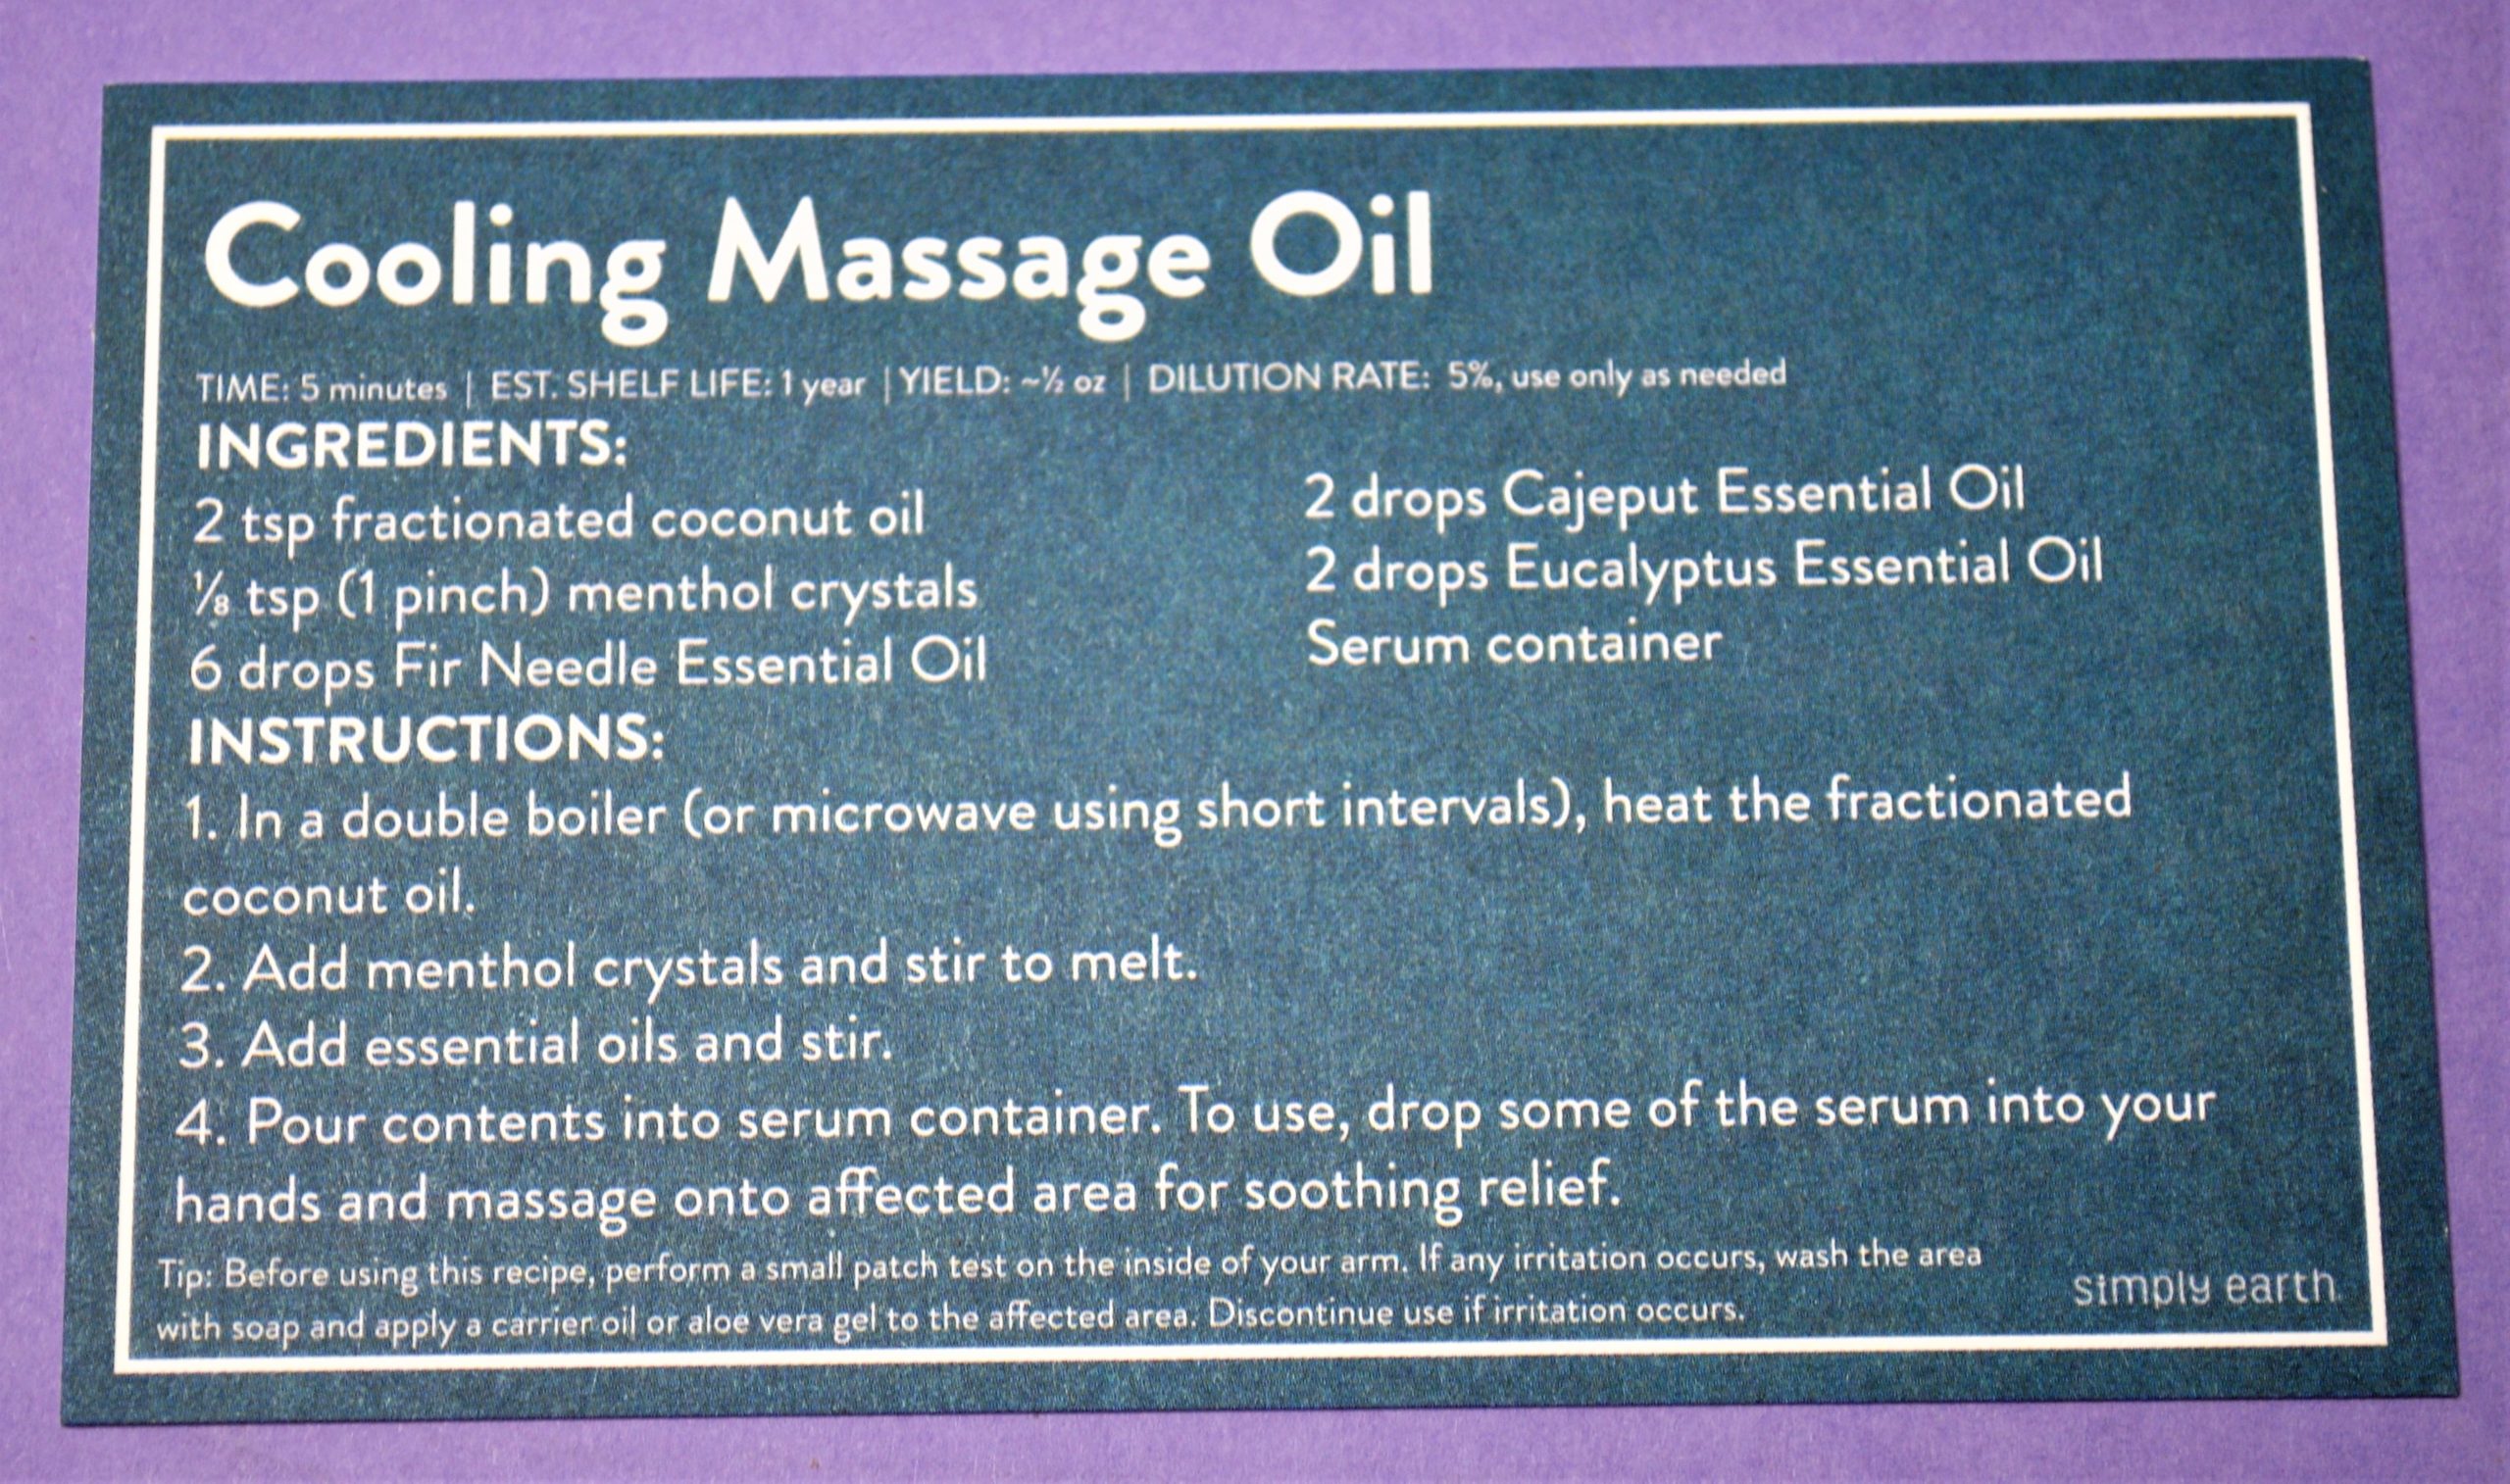 Simply Earth Cooling Massage Oil Recipe